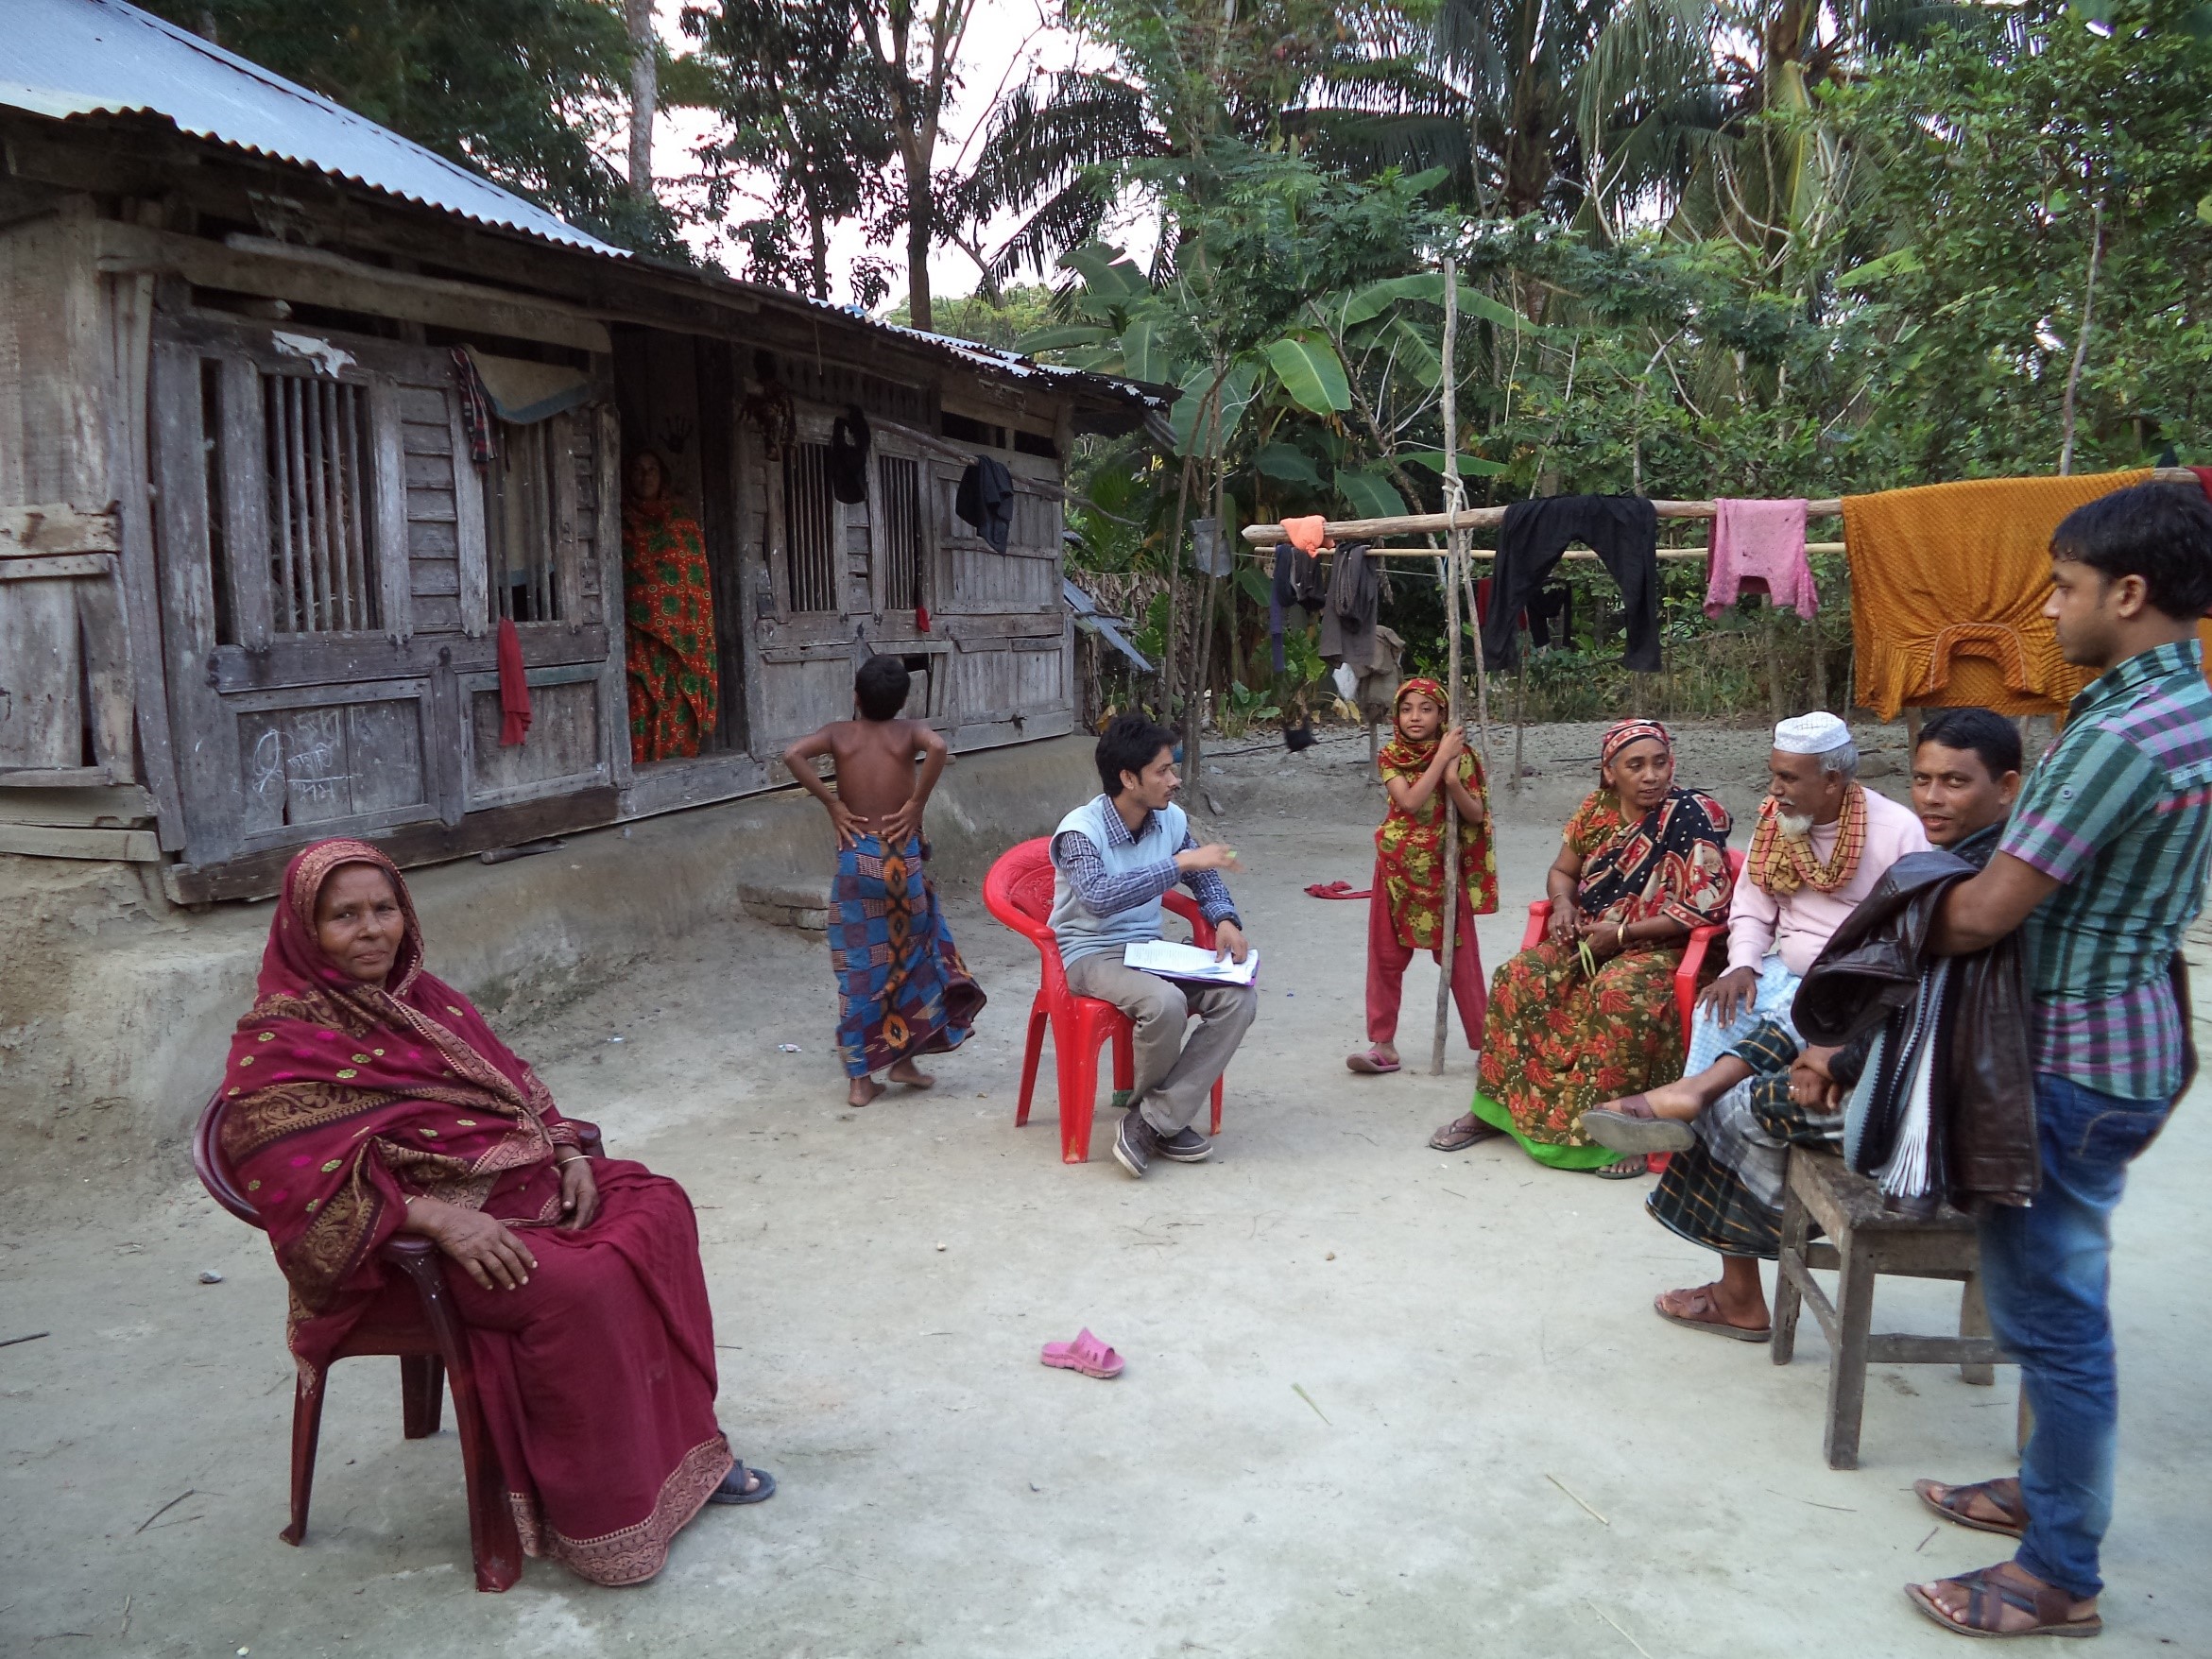 The CREL/JDR 3RD Mangrove Valuation team interviews residents of Sharankhola county, Khulna District, to understand how they use Sundarbans mangrove resources as part of their livelihoods